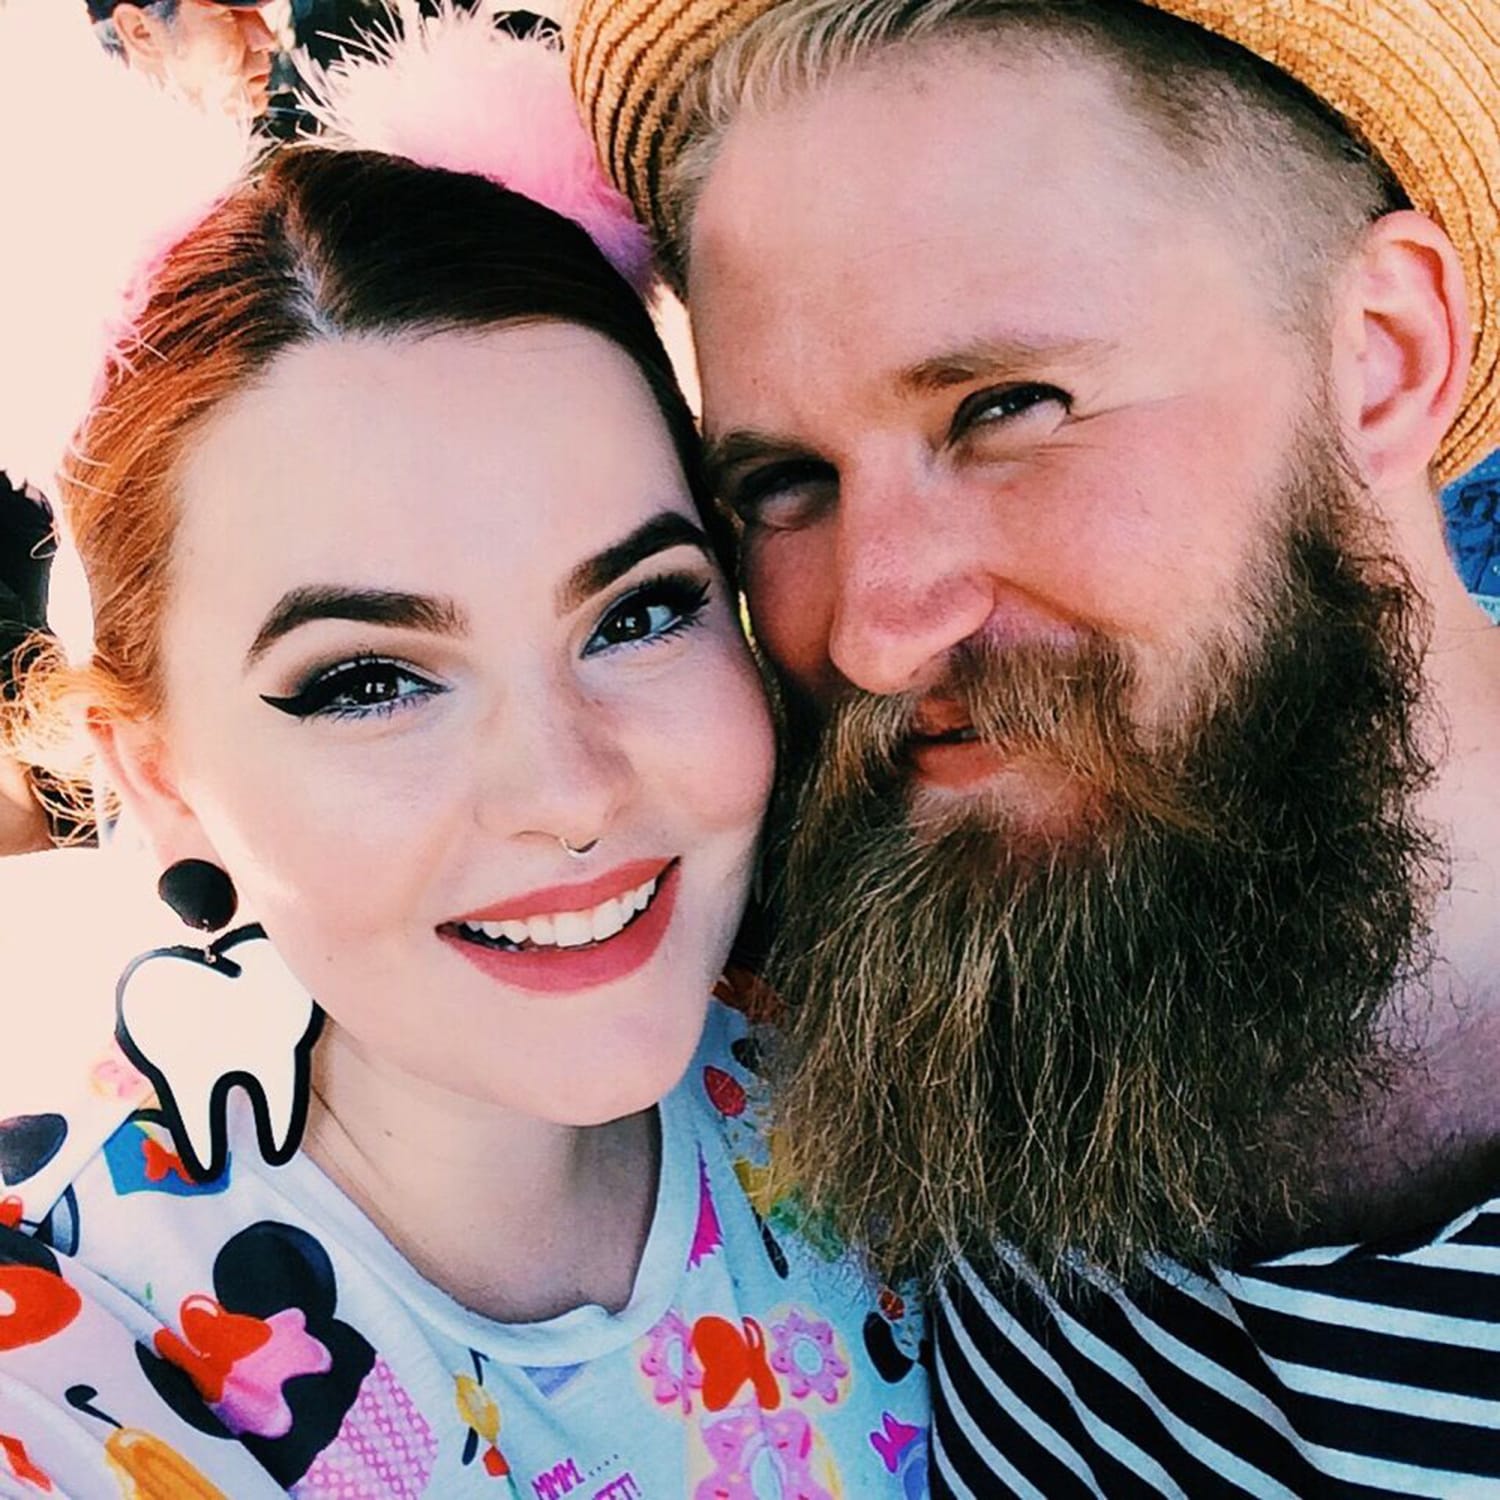 Plus-size model Tess Holliday strikes back after about pregnancy weight